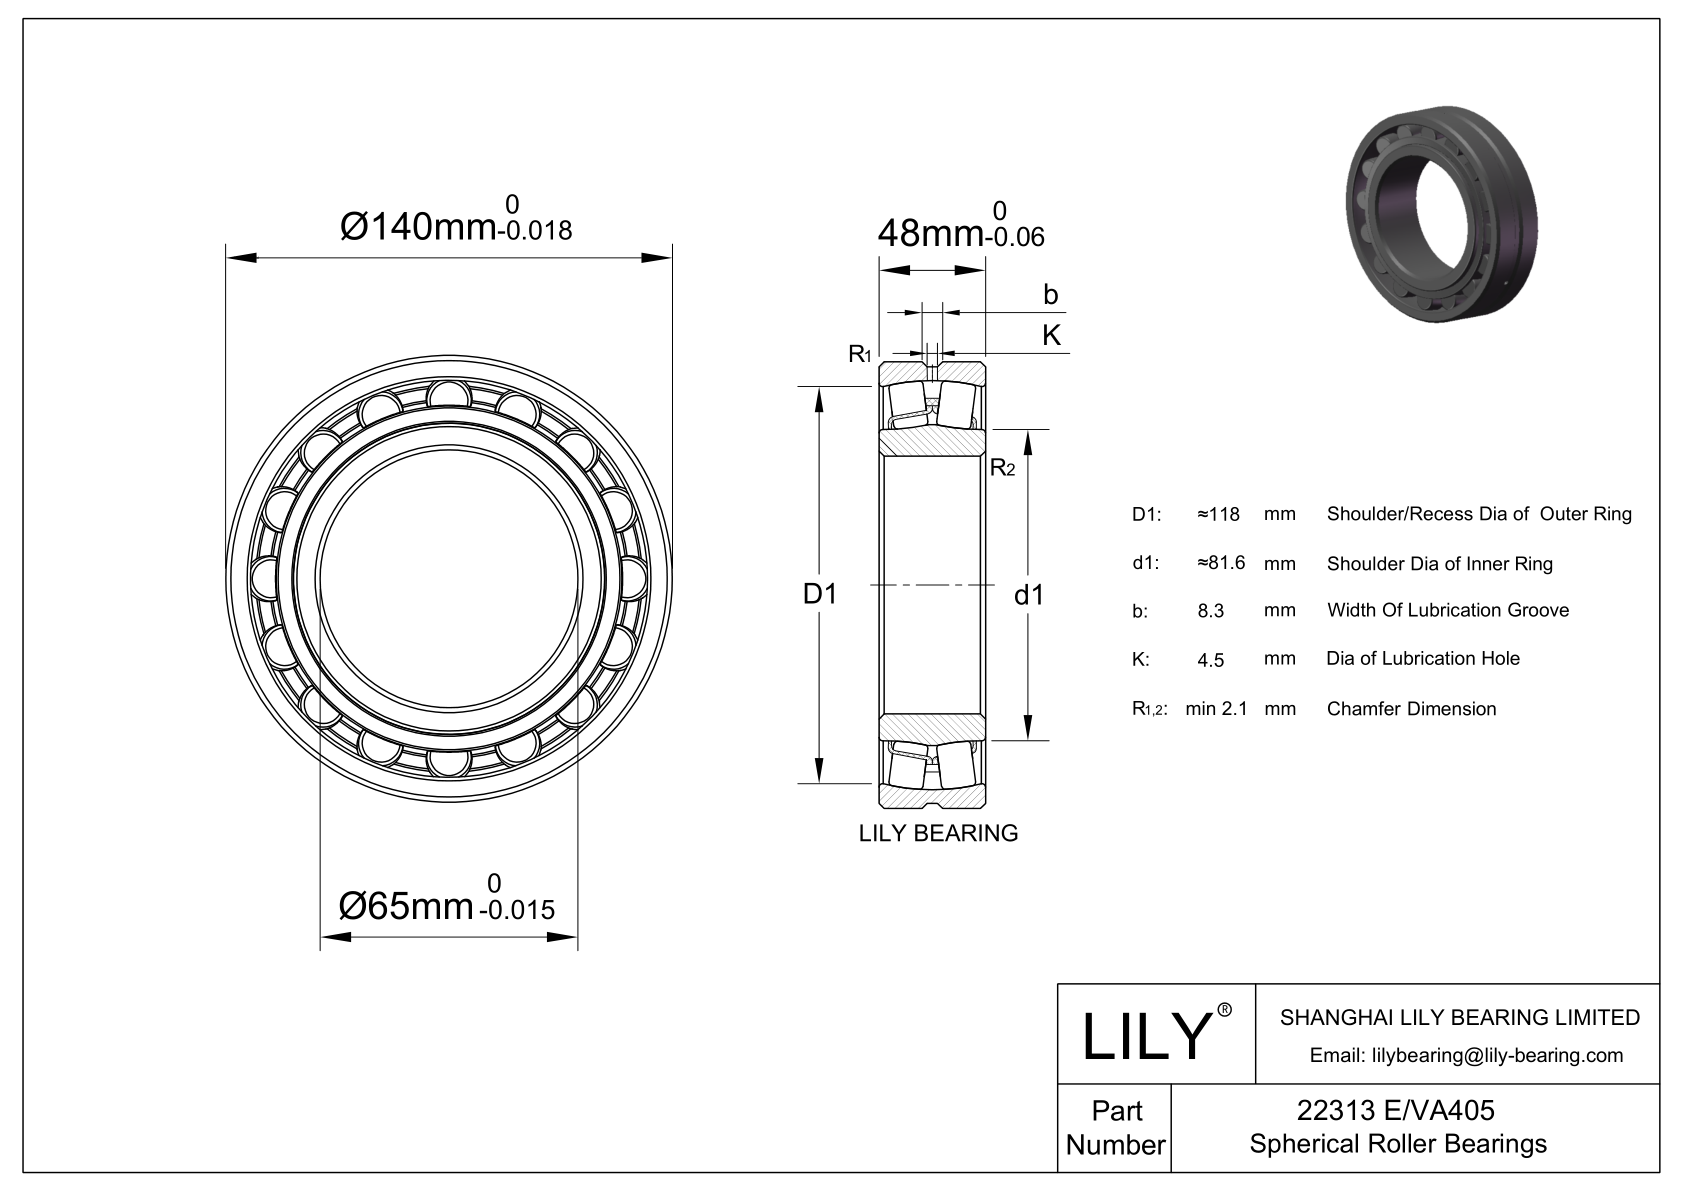 22313 E/VA405 Double Row Spherical Roller Bearing cad drawing